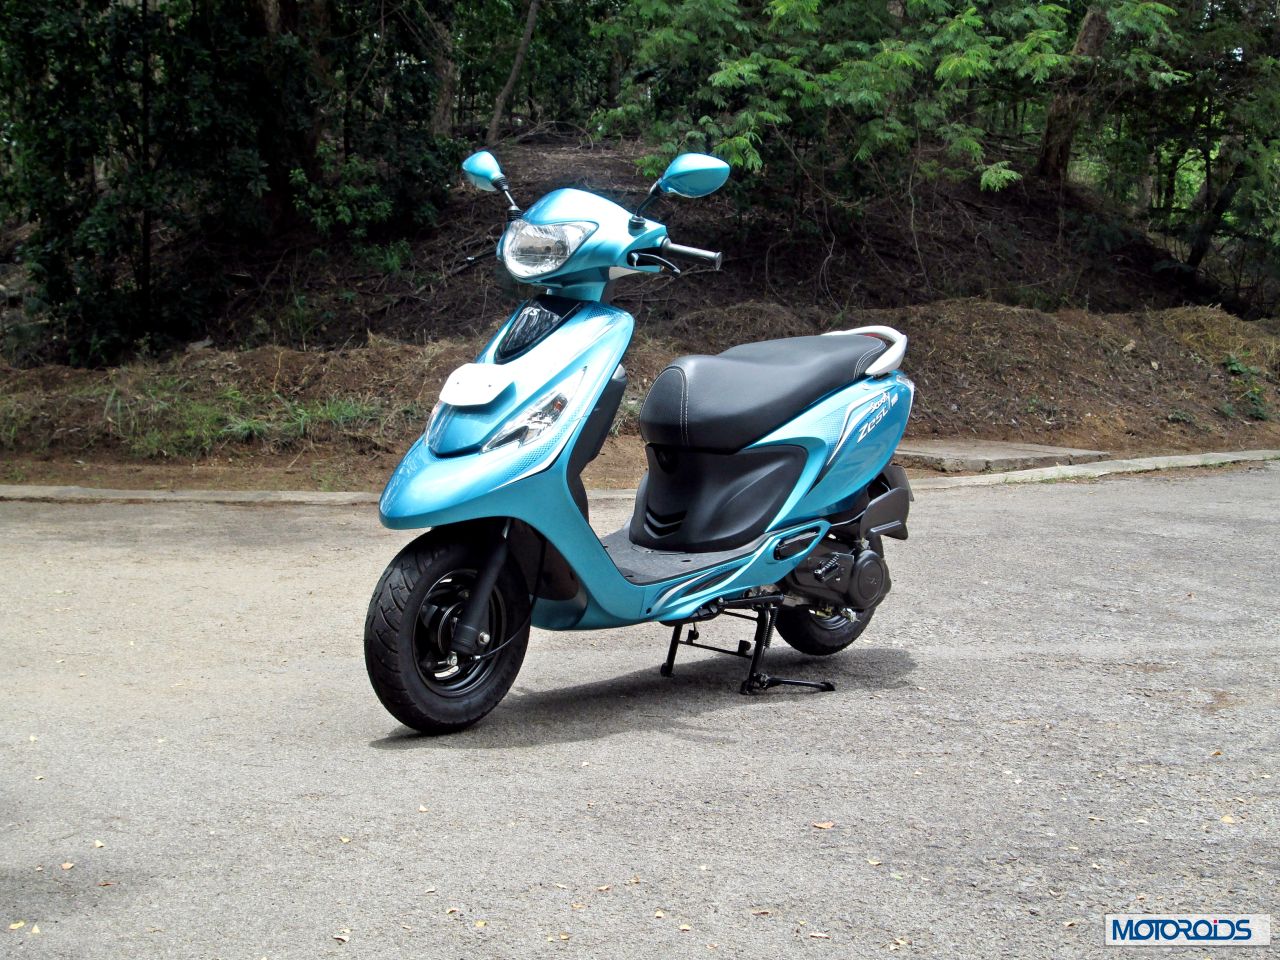 New Tvs Scooty Zest 110 Review Value Redefined Motoroids